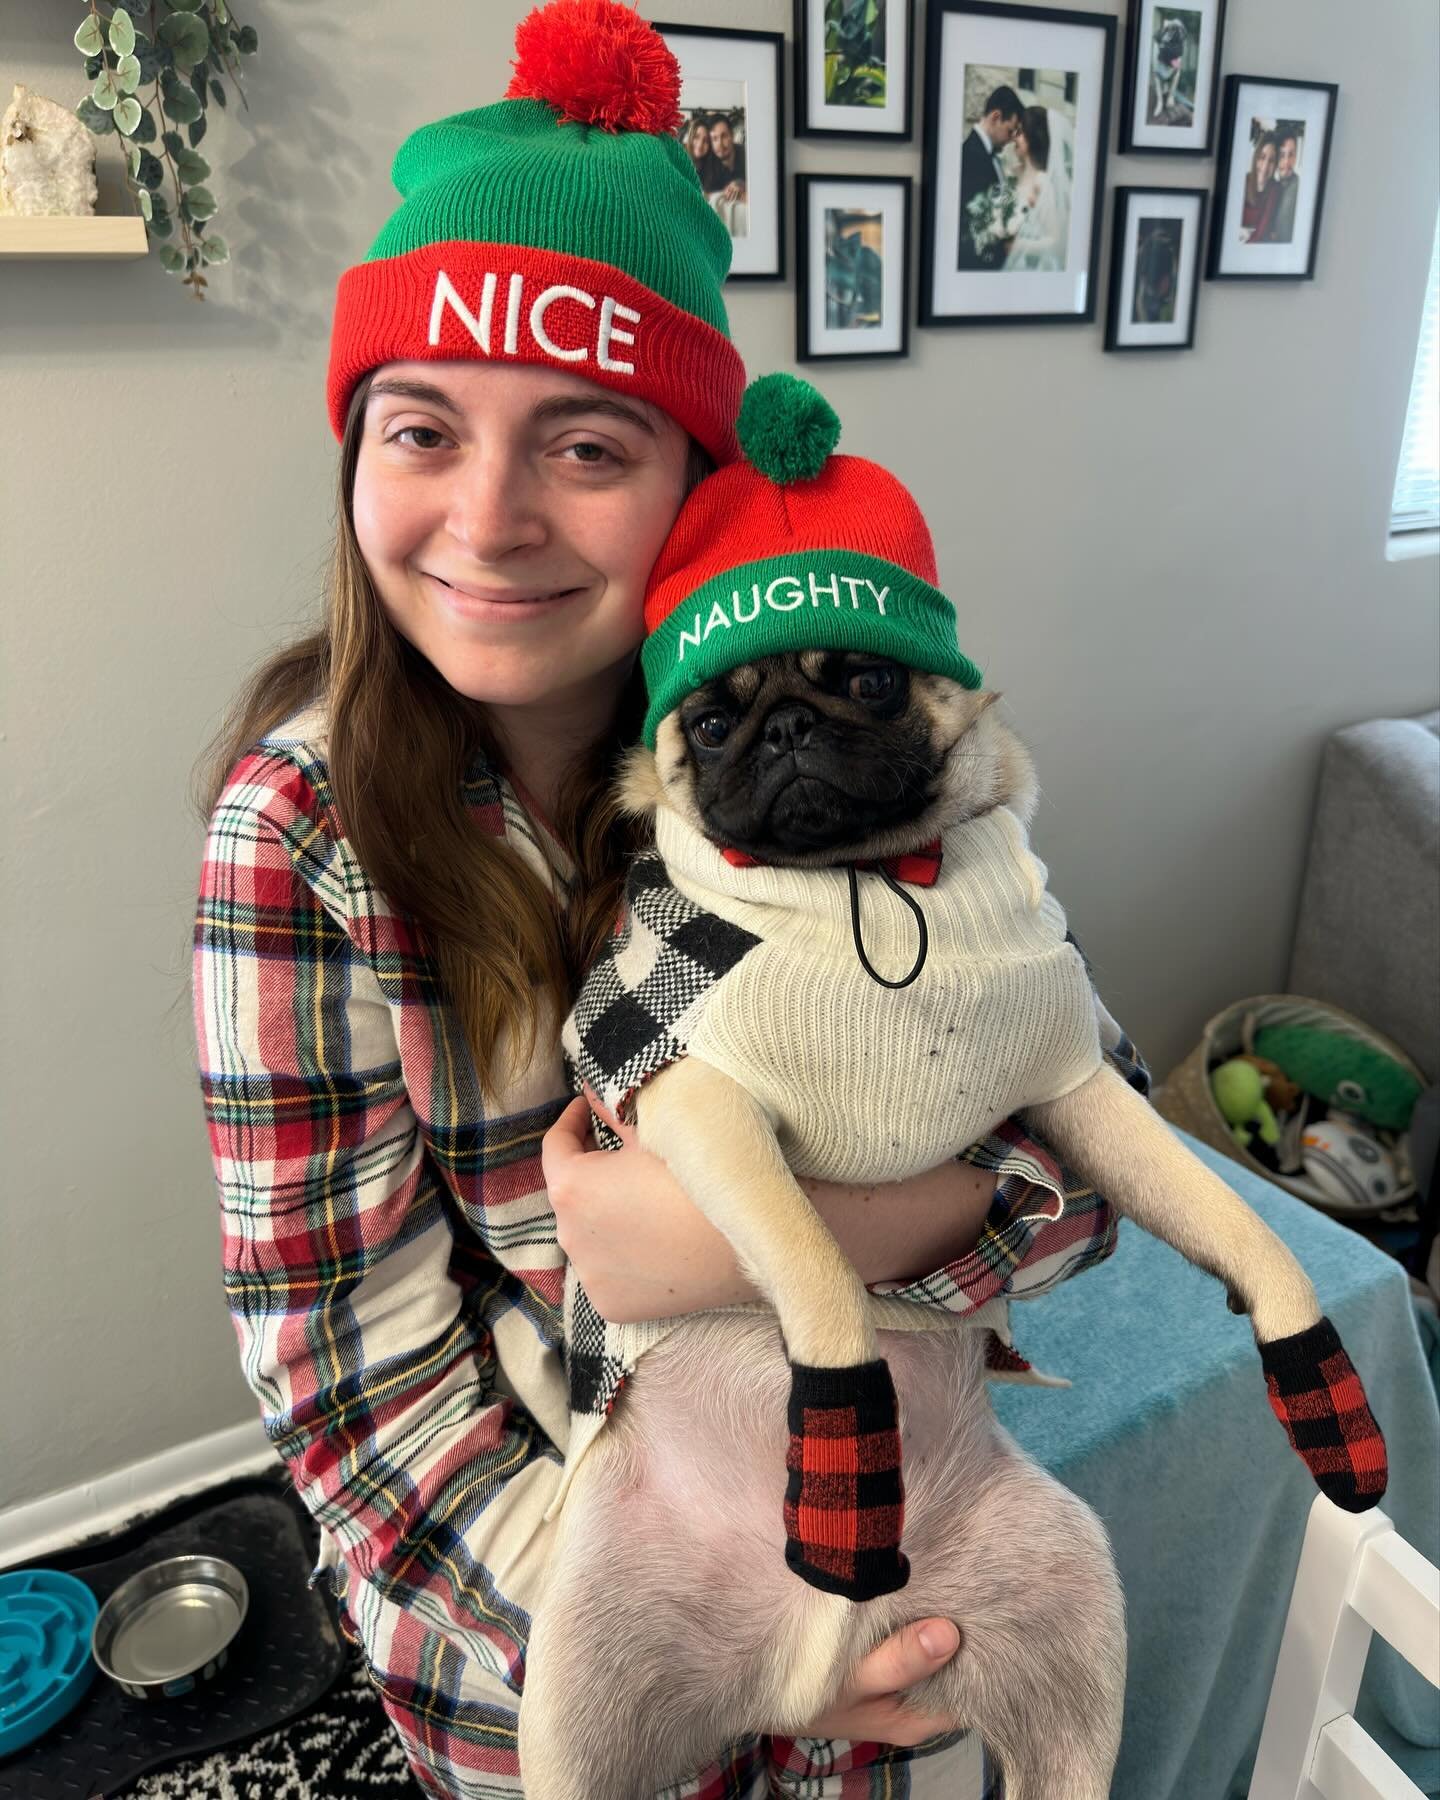 Grogu and I are ready for Christmas! The fun lasted all about 5 minutes before all socks and the hat were ripped off 🤣